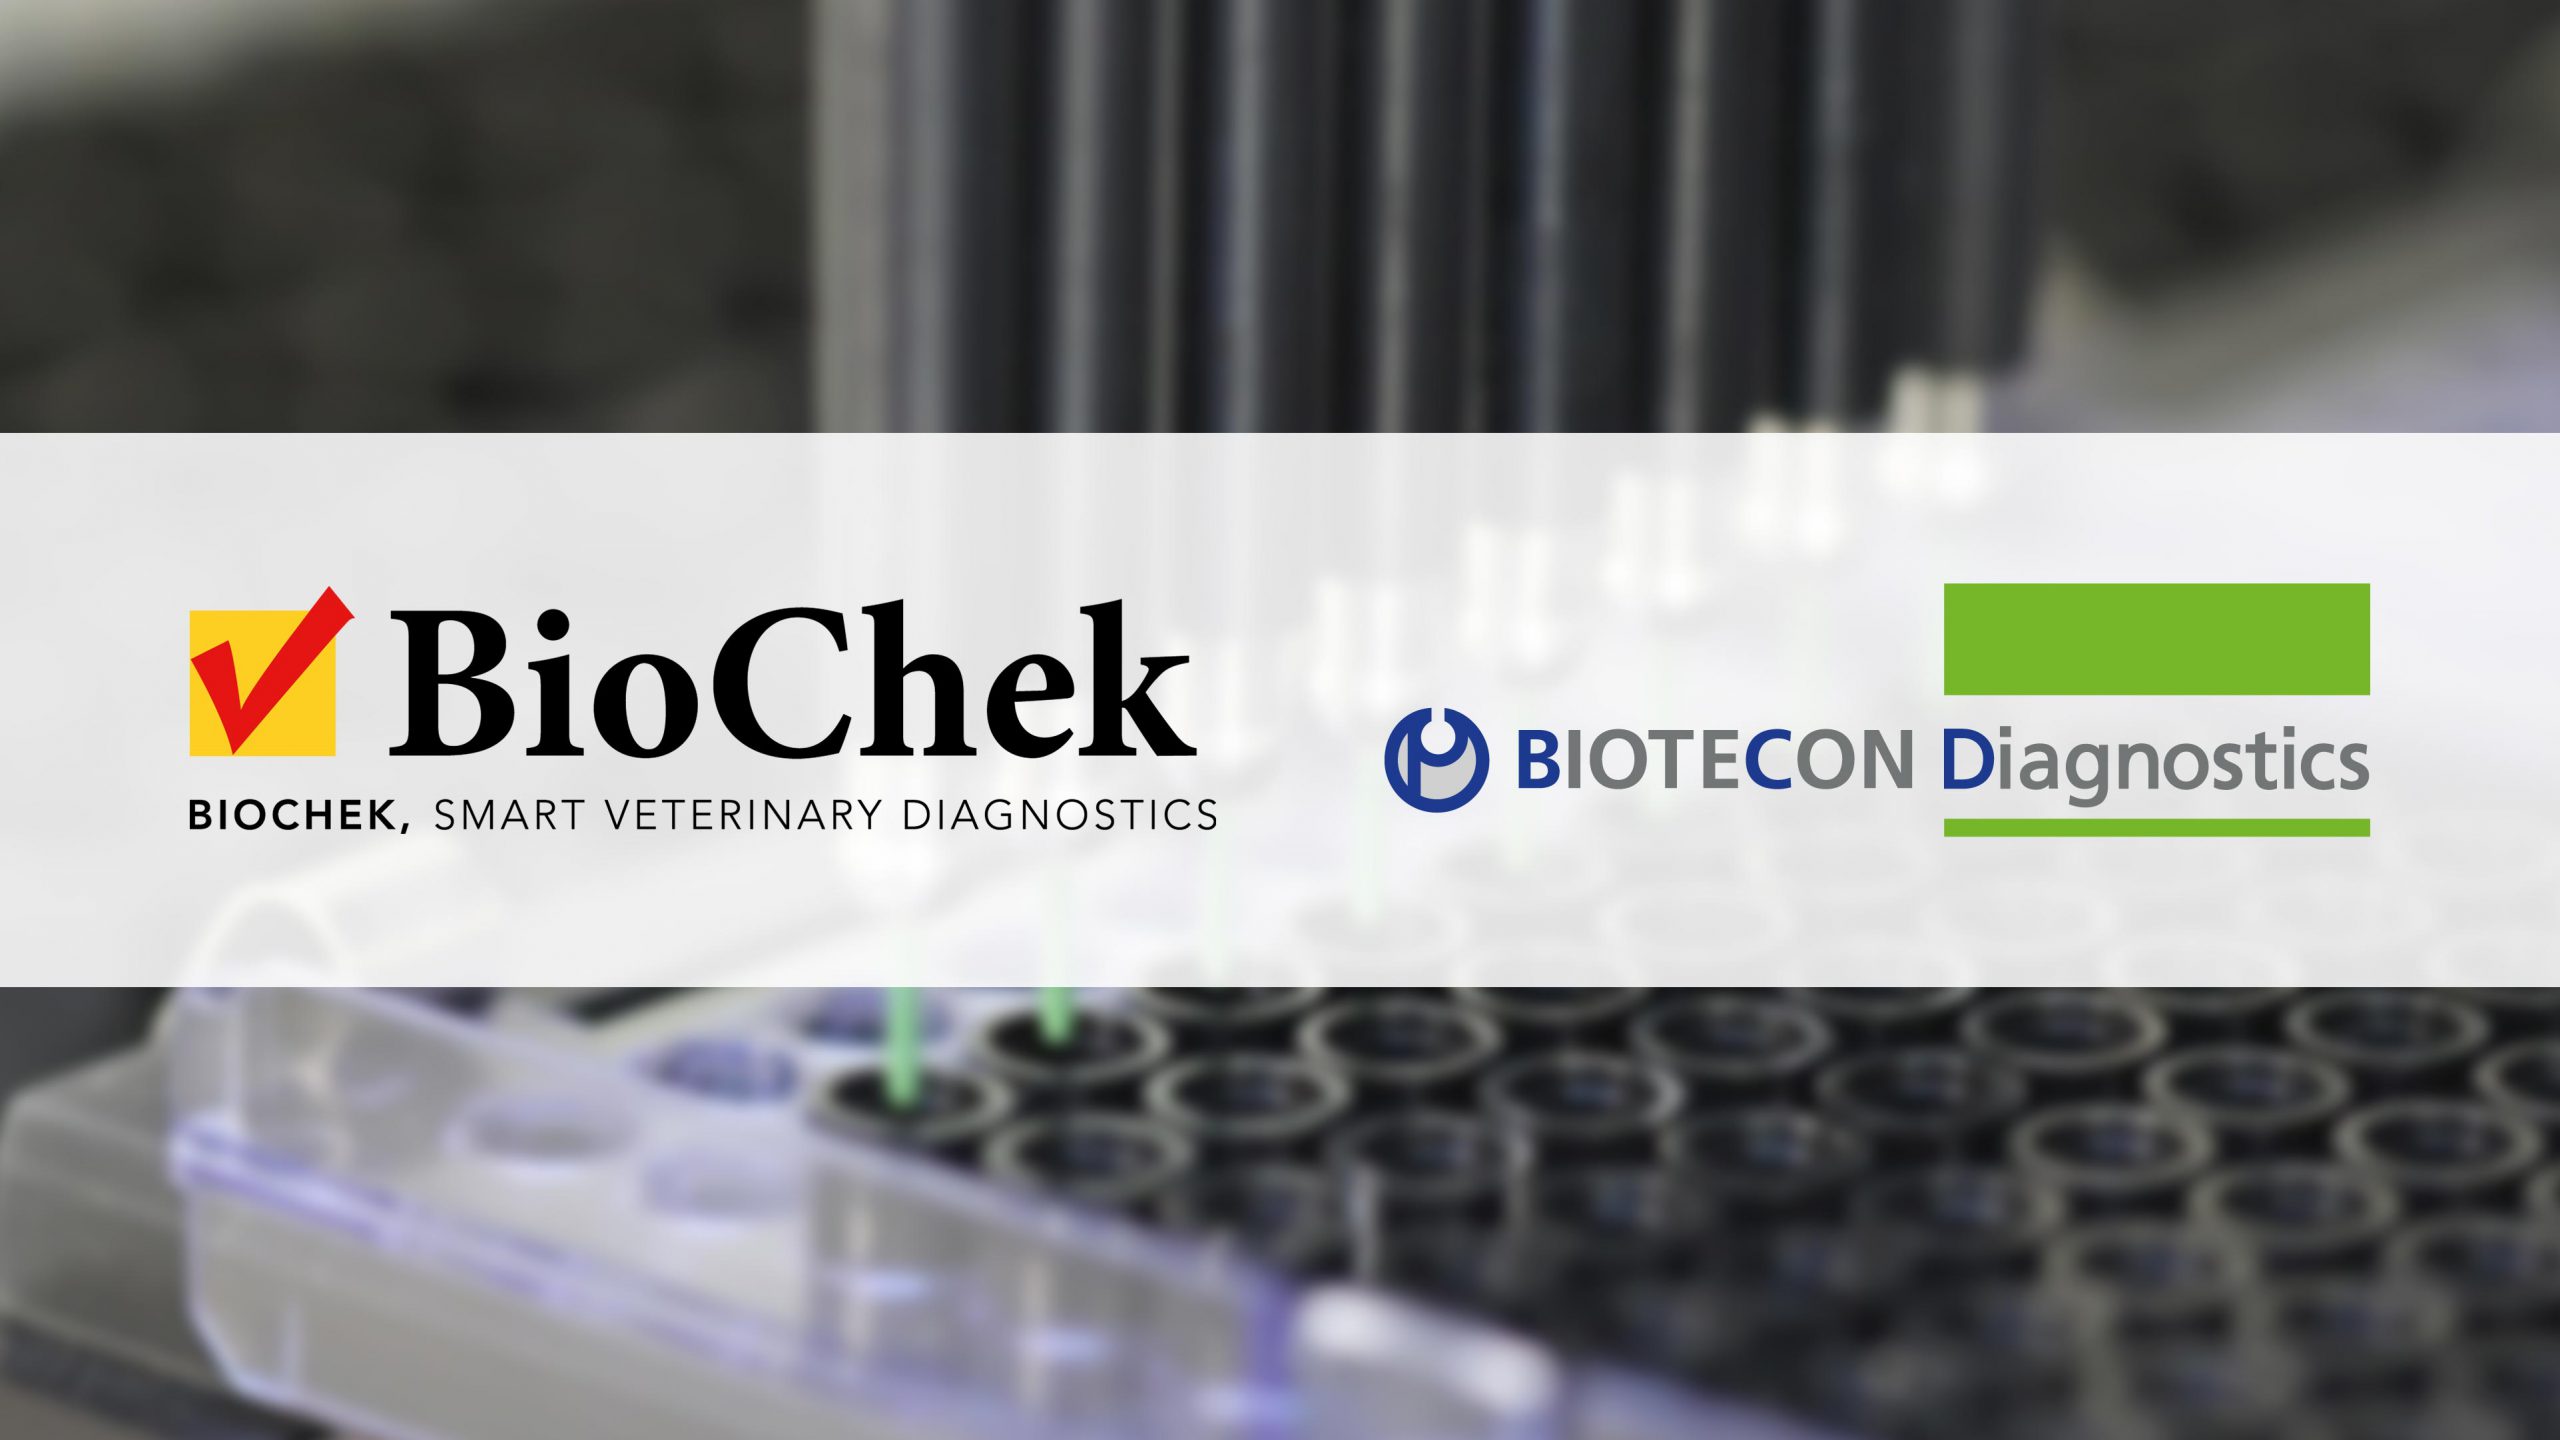 BioChek acquires BIOTECON, creates leading global player in Veterinary and Food Safety solutions